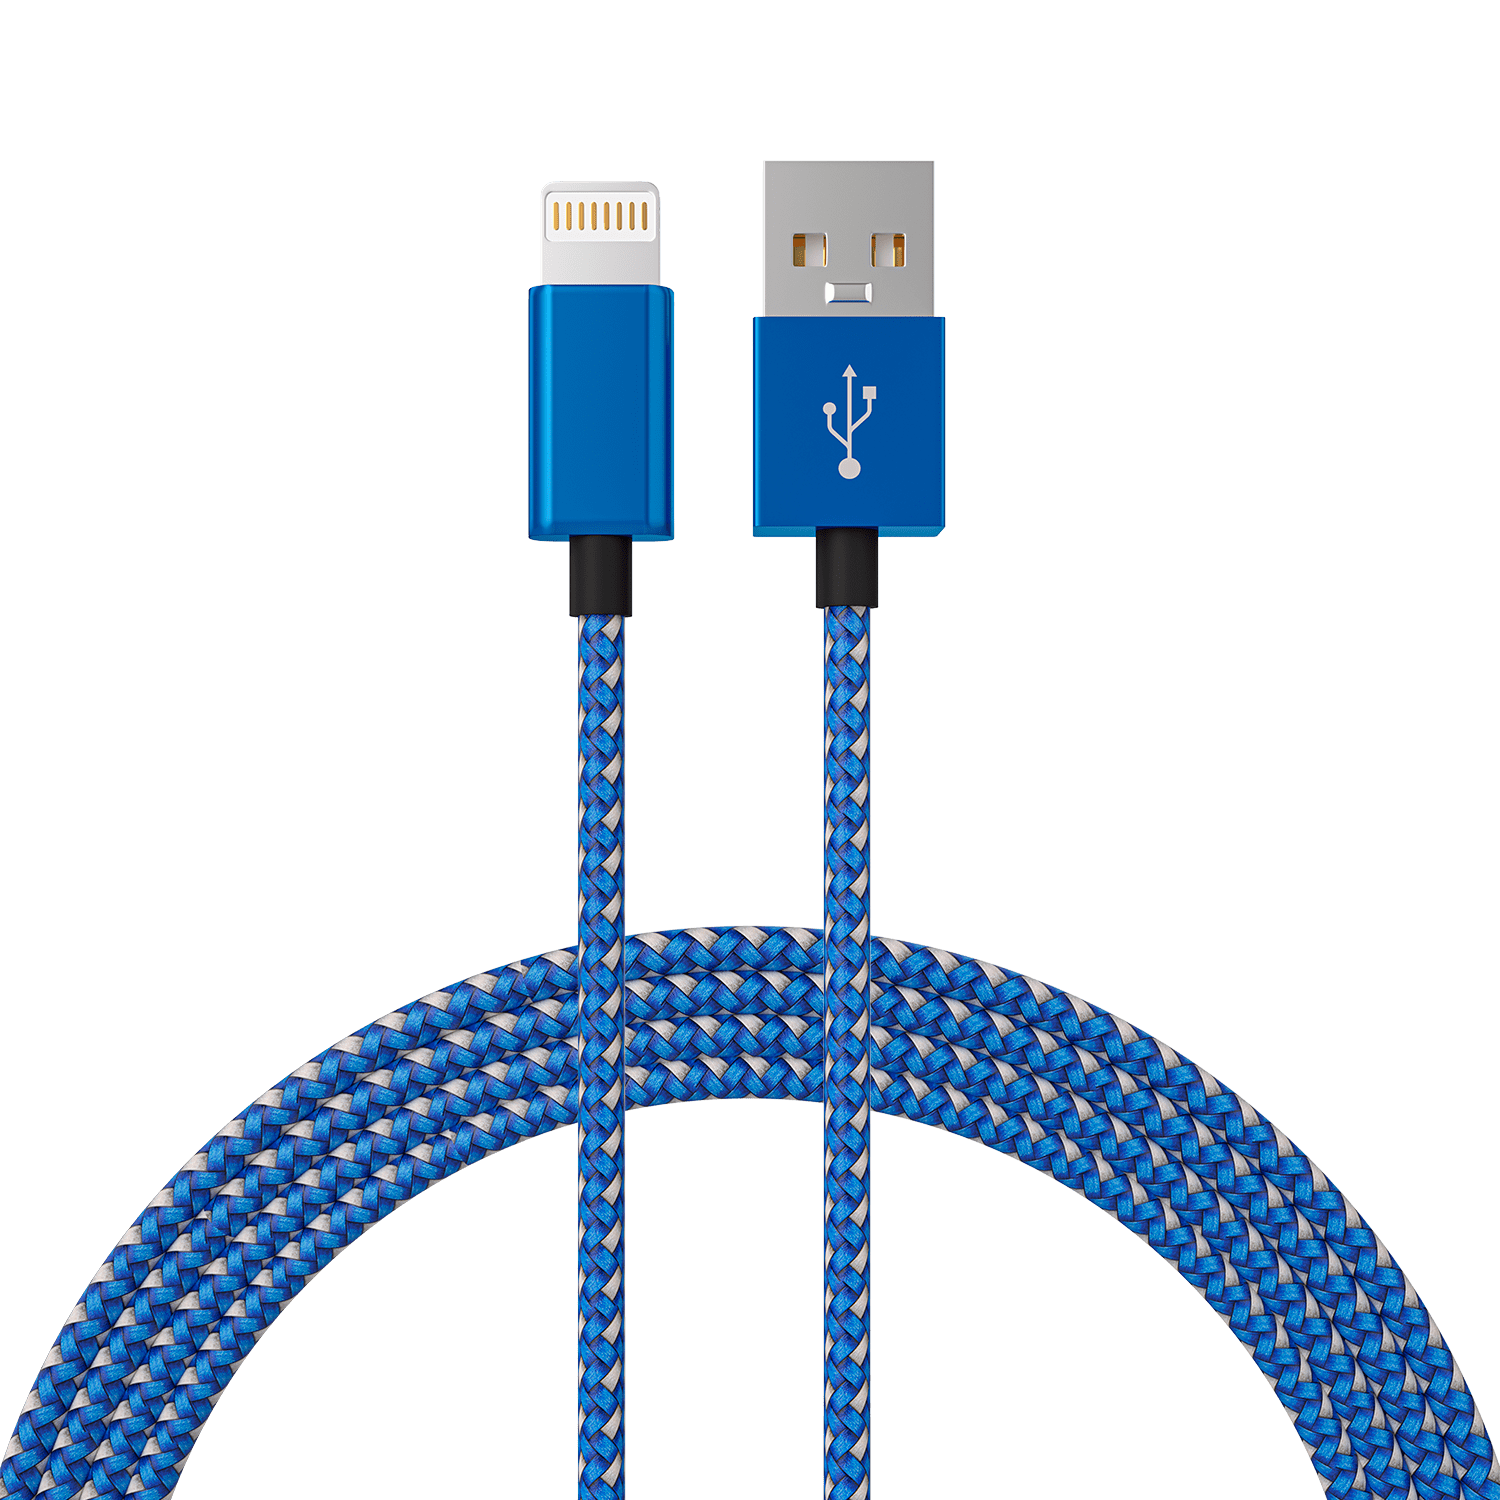 6ft Long MFI Certified Phone Charger Cable - Heavy-Duty Durable Braided  Data Sync Lightning to USB Charging Cables Cords for iPhones - Blue/White -  